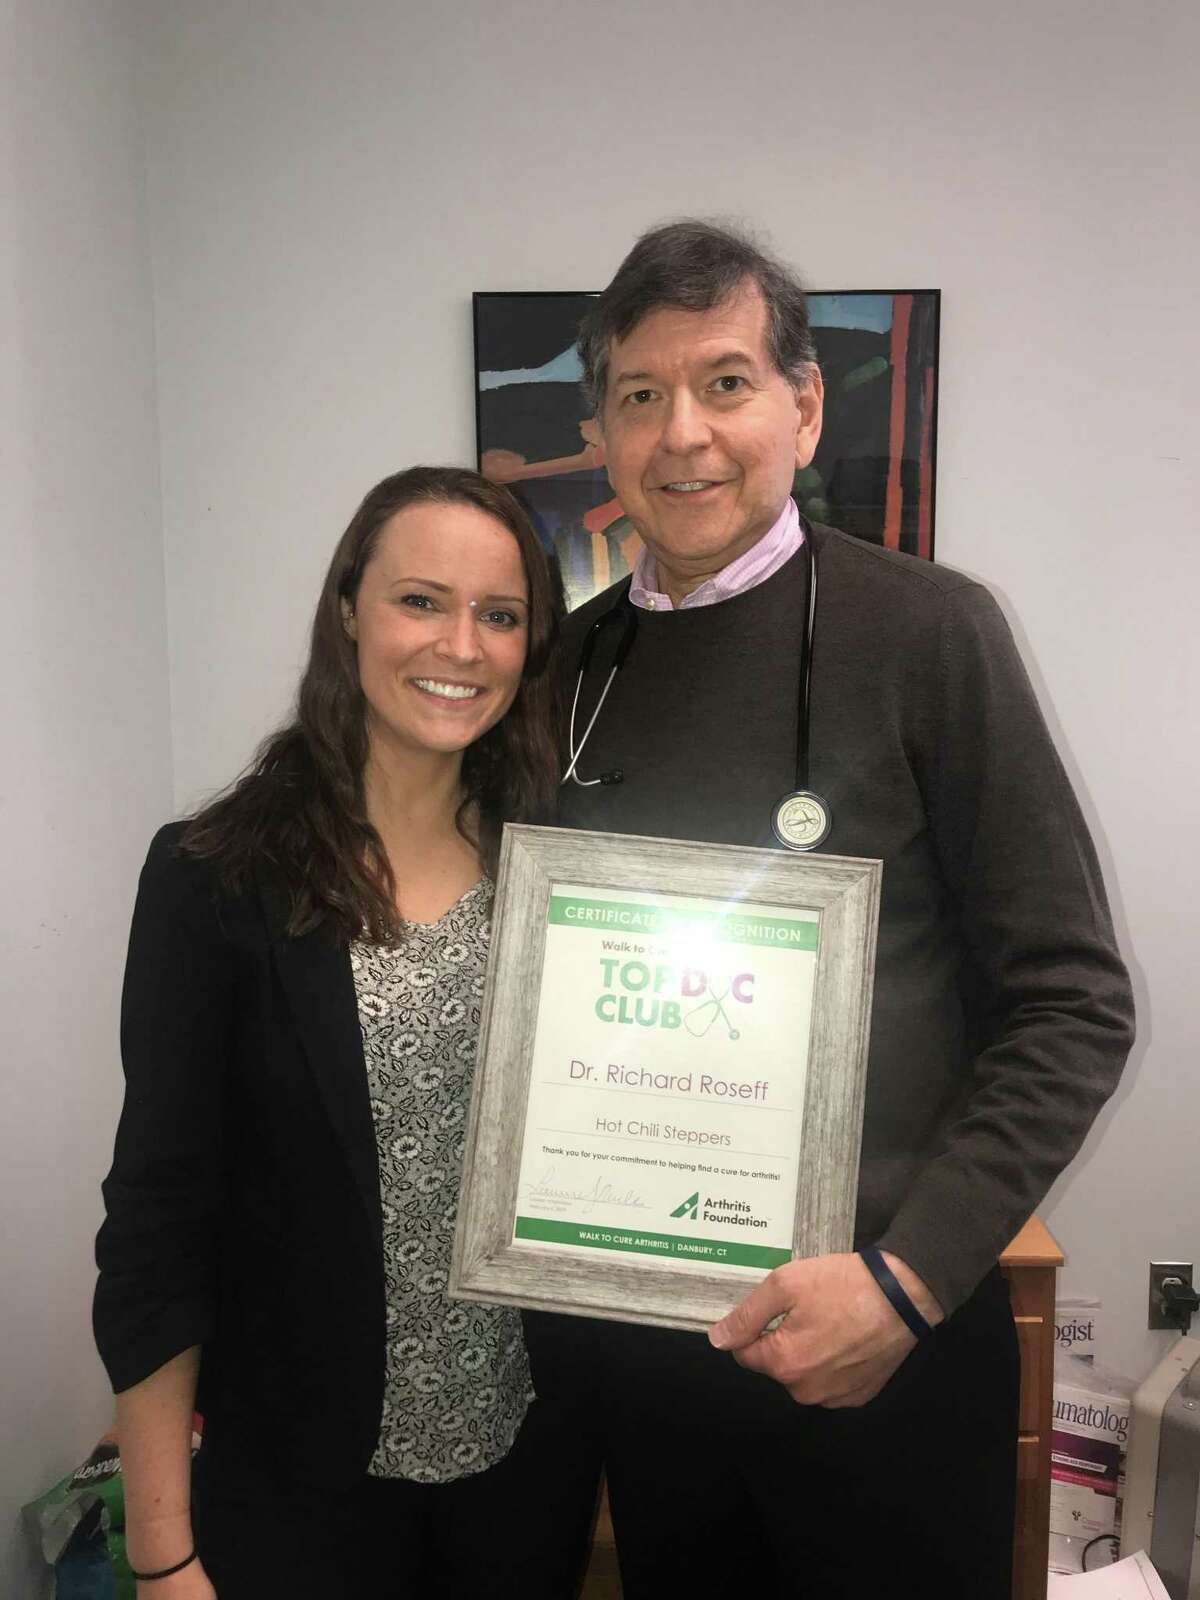 Dr. Richard Roseff, pictured here with Emily Viccaro, from the Arthritis Foundation, has been granted the “Top Doc” award from the foundation’s Walk to Cure Arthritis. Roseff also accepted the corporate chair role on the walk committee.